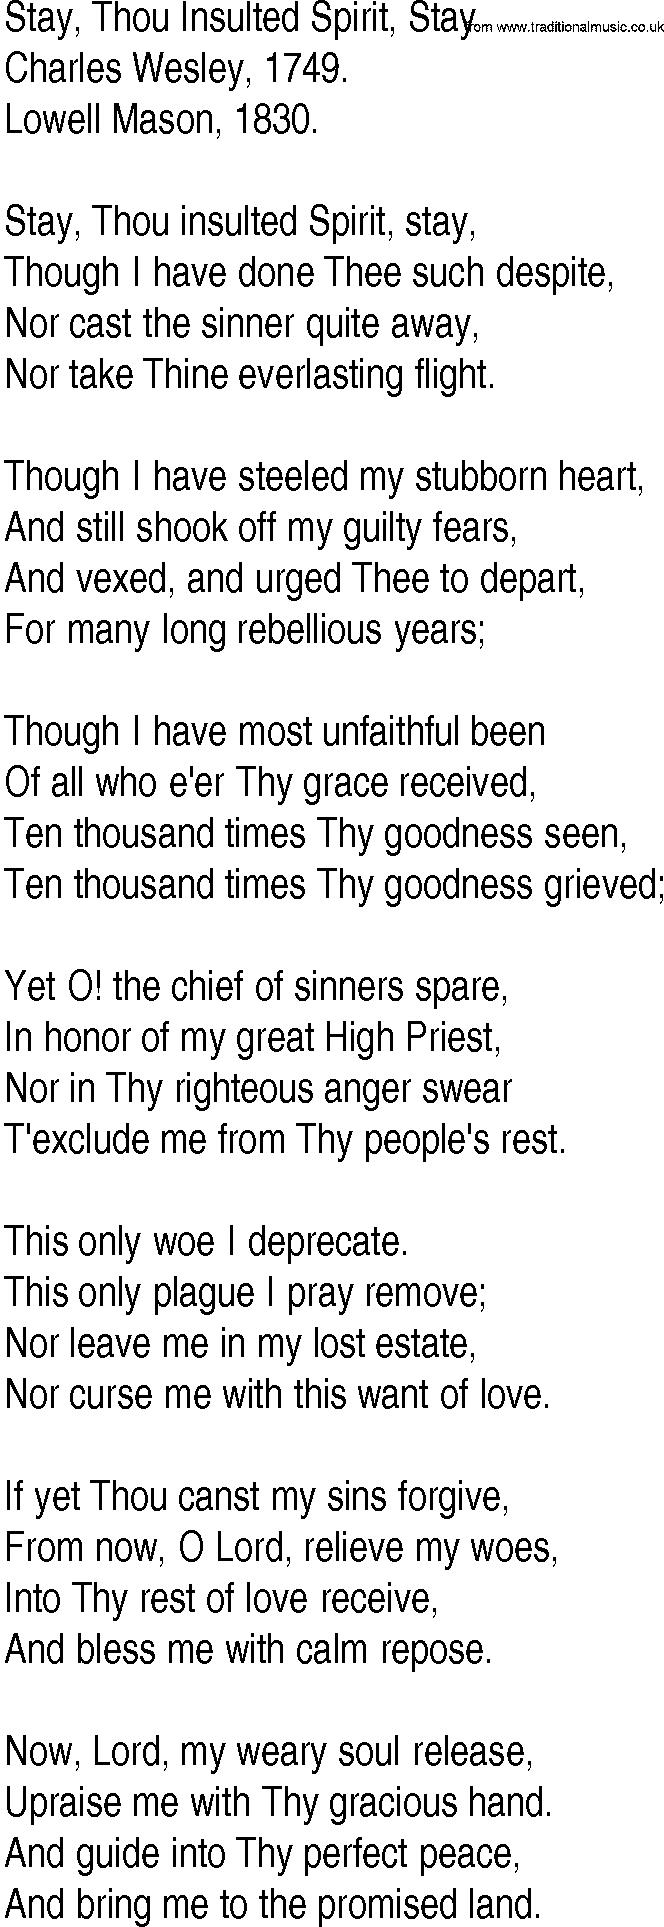 Hymn and Gospel Song: Stay, Thou Insulted Spirit, Stay by Charles Wesley lyrics